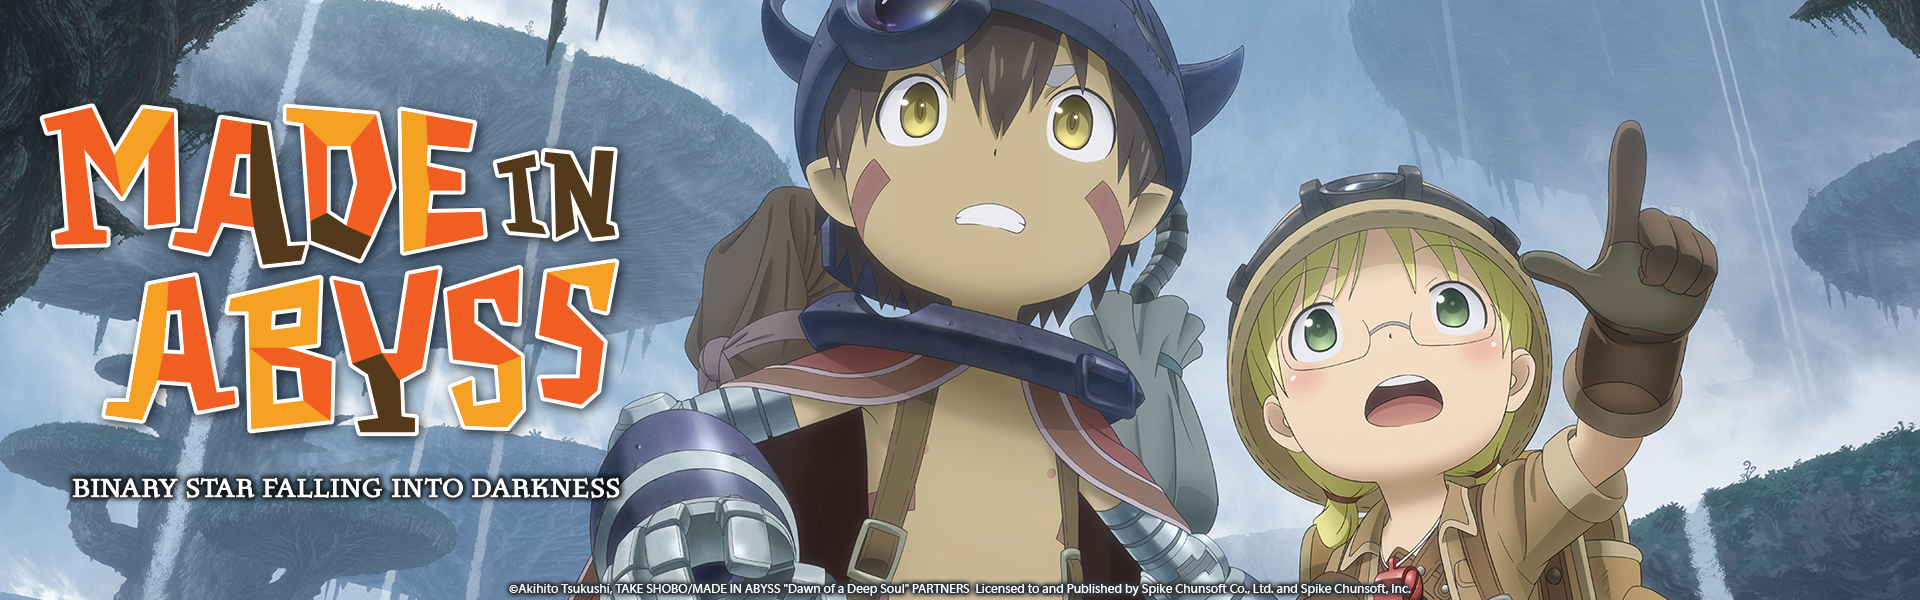 Made in Abyss Returns With Dark, But Promising Season 2 Premiere